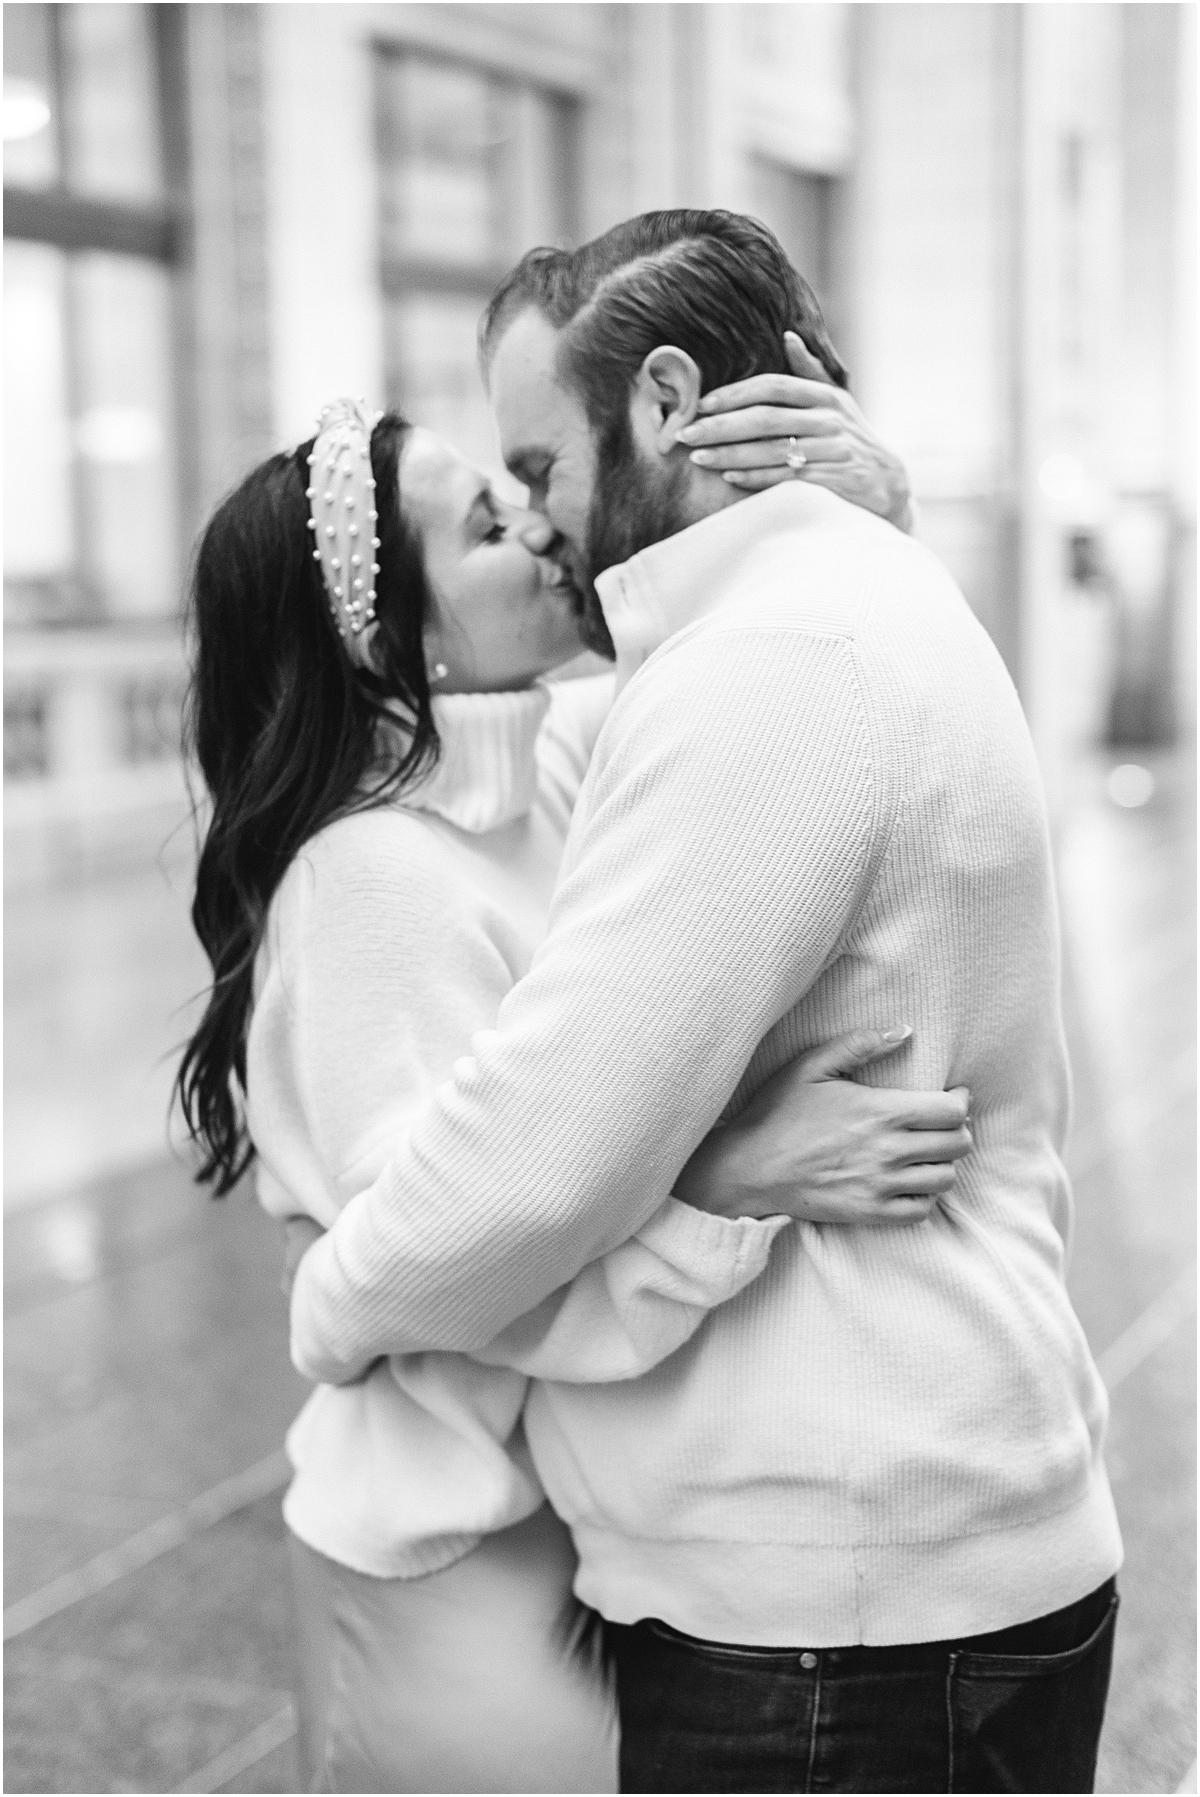 Candid and romantic engagement photos